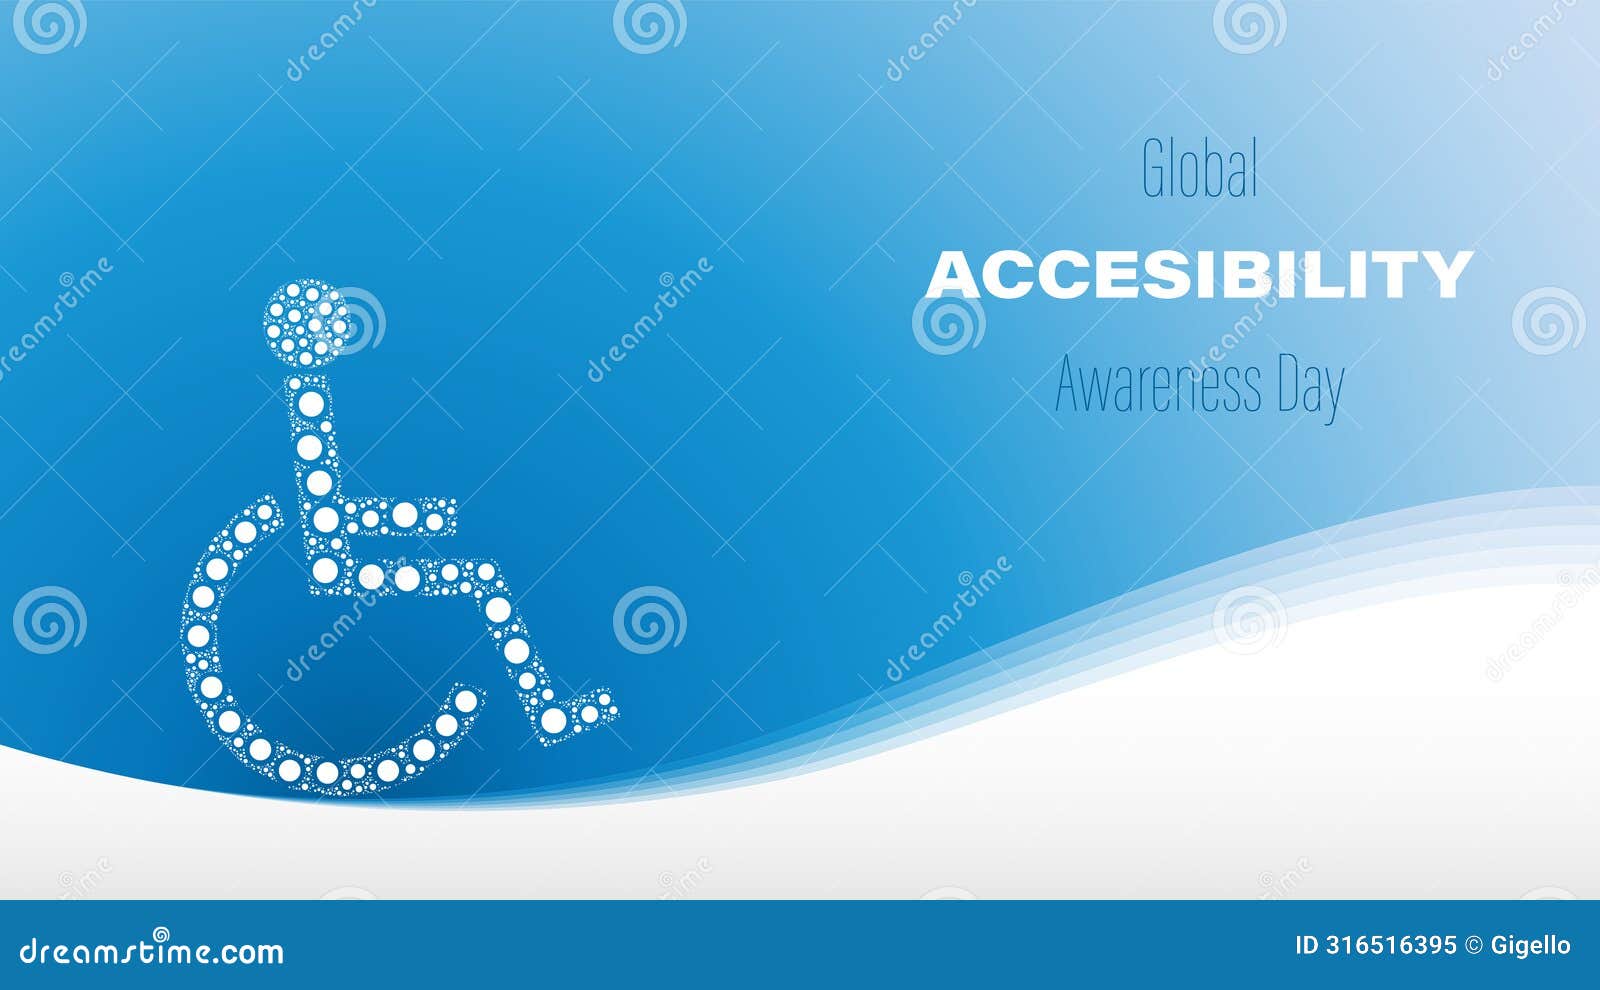 global accessibility awareness day,  